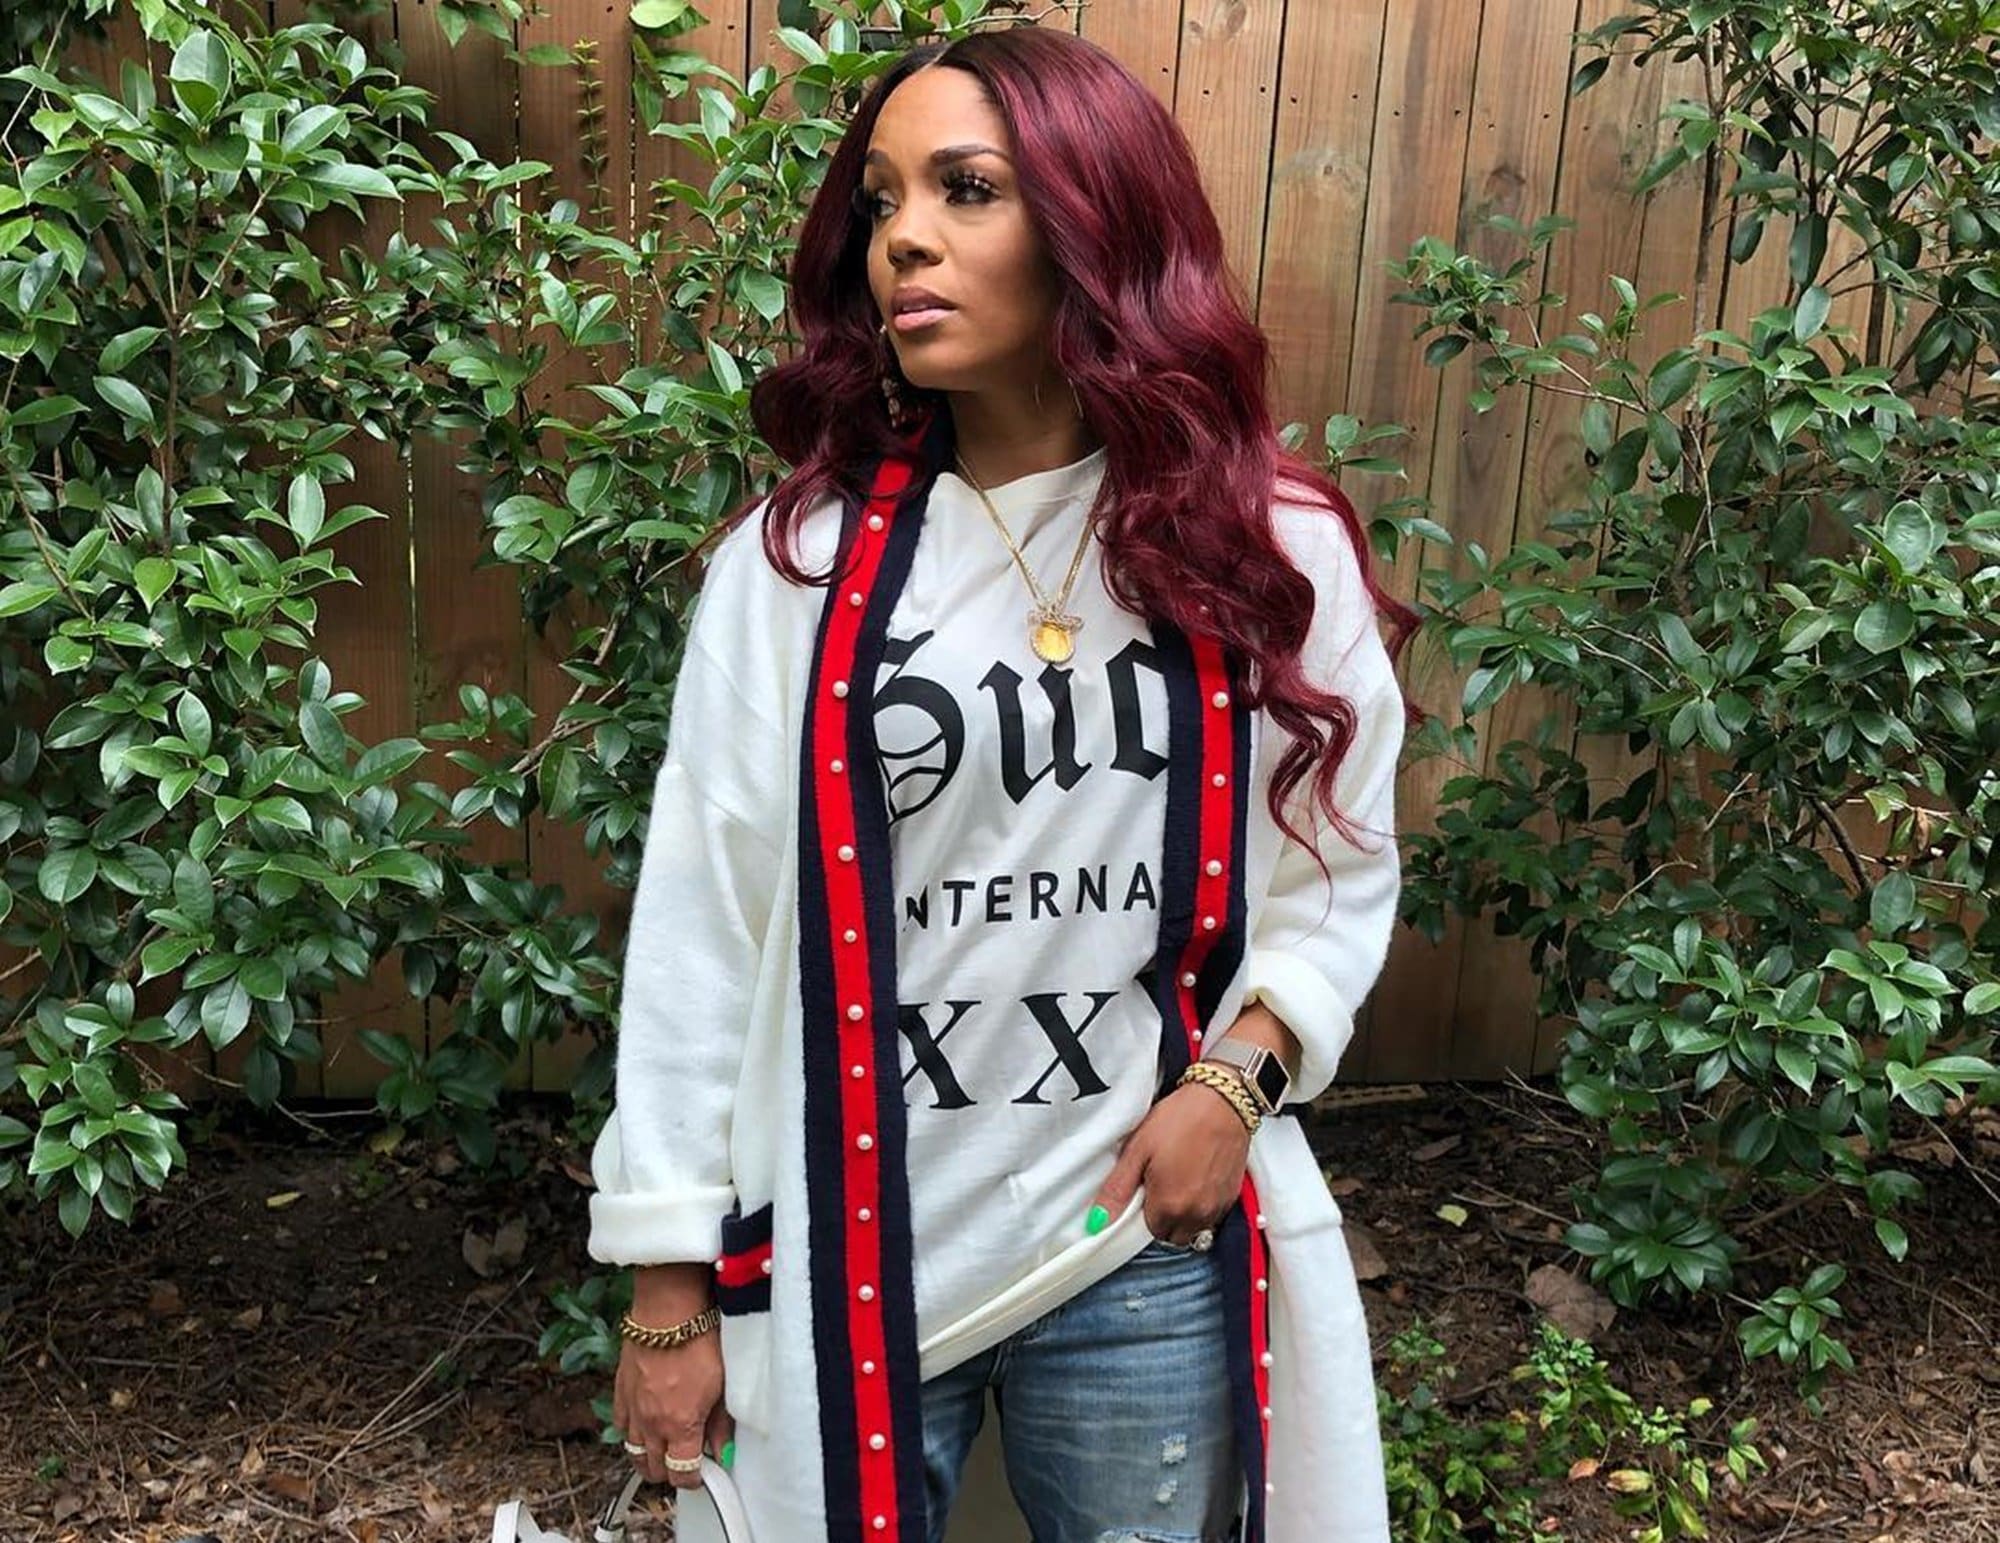 Rasheeda Frost And Her Mom Are Showing Off Their Elegant Outfits For Mother's Day - See The Photo